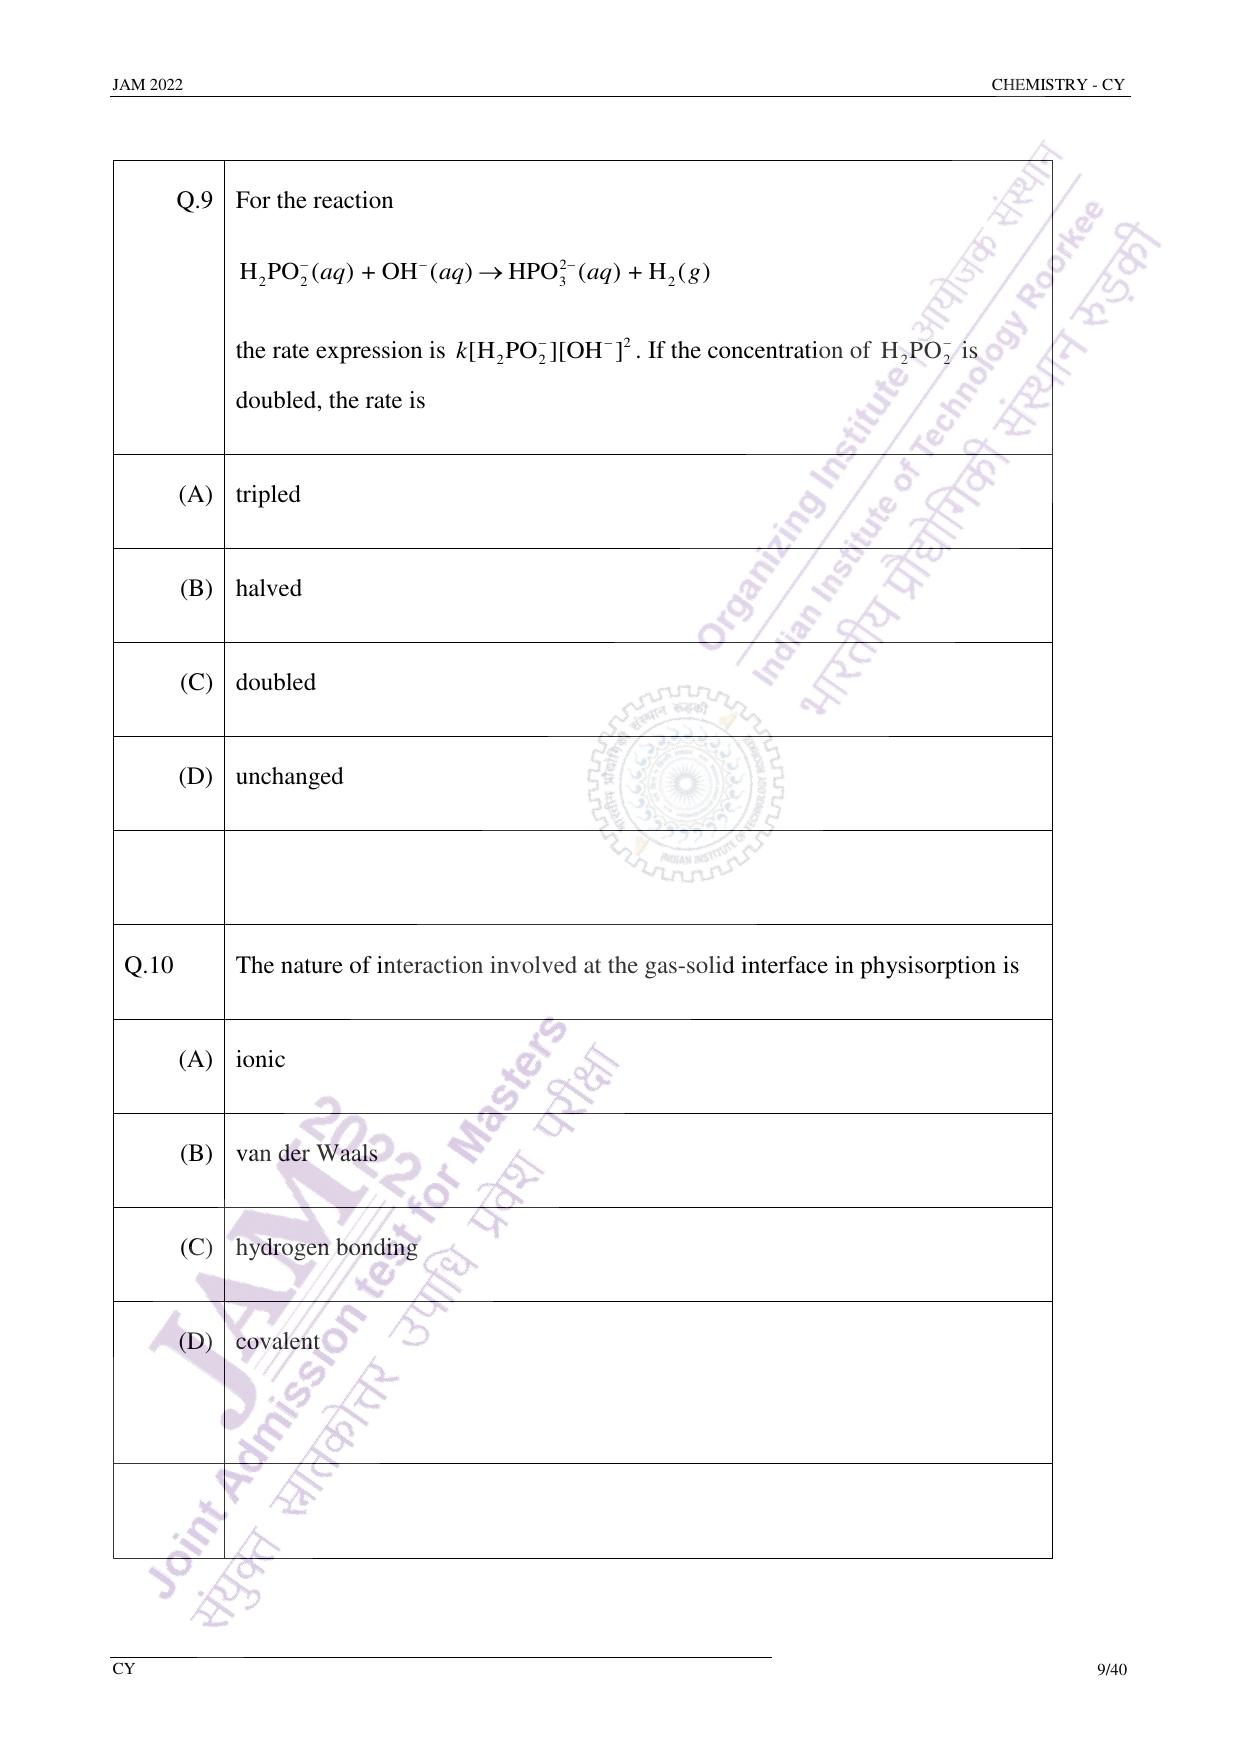 JAM 2022: CY Question Paper - Page 8